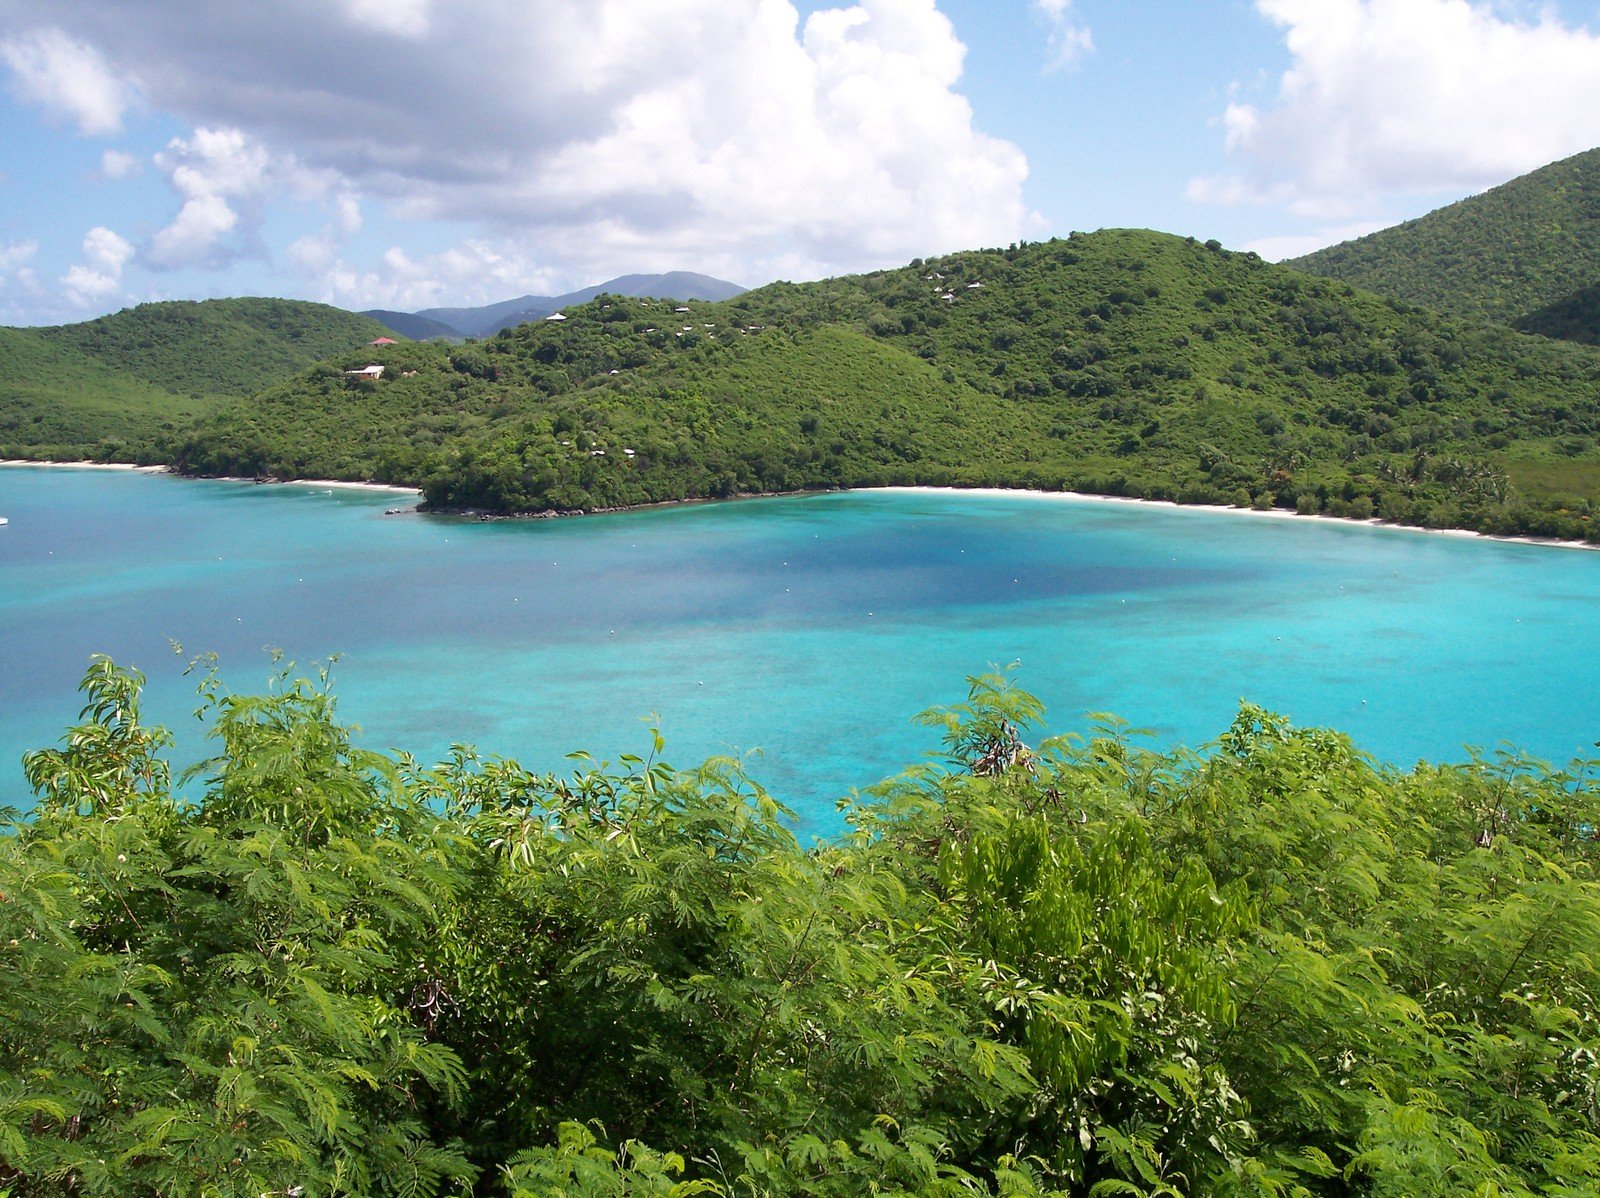 the blue water and white beach are surrounded by tropical vegetation